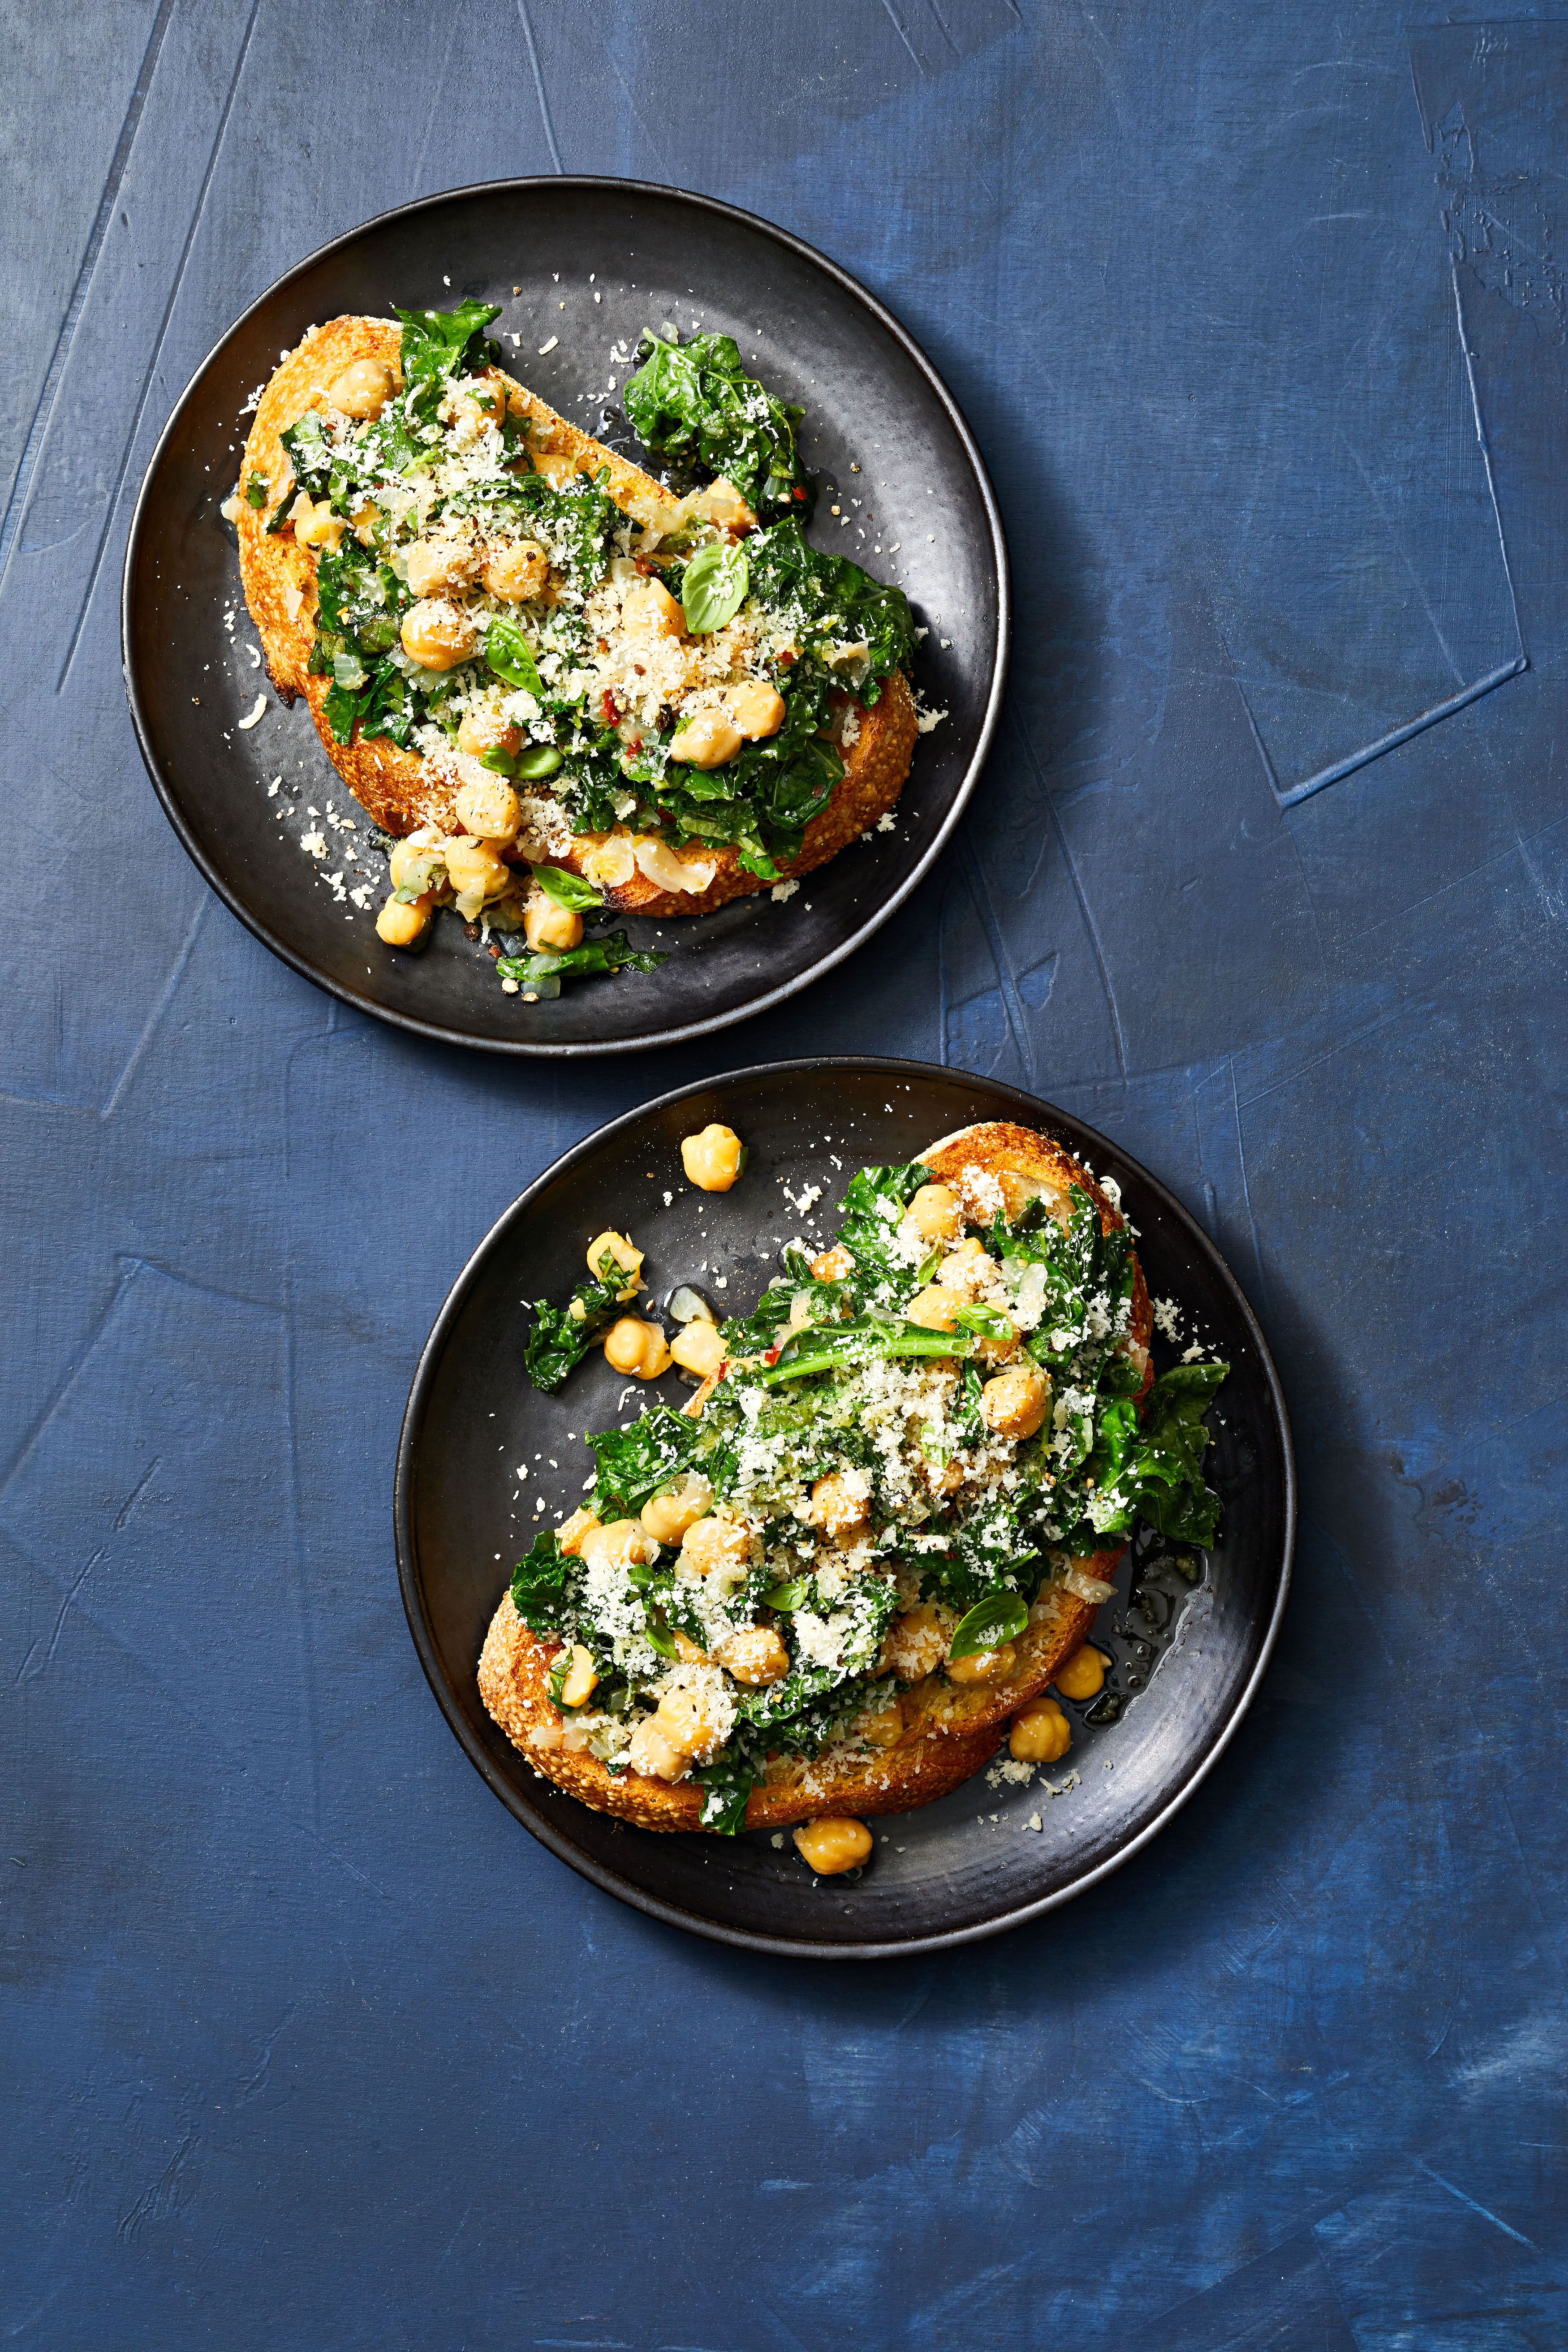 https://hips.hearstapps.com/hmg-prod/images/kale-and-chickpea-toasts-6580cb3f19f73.jpg